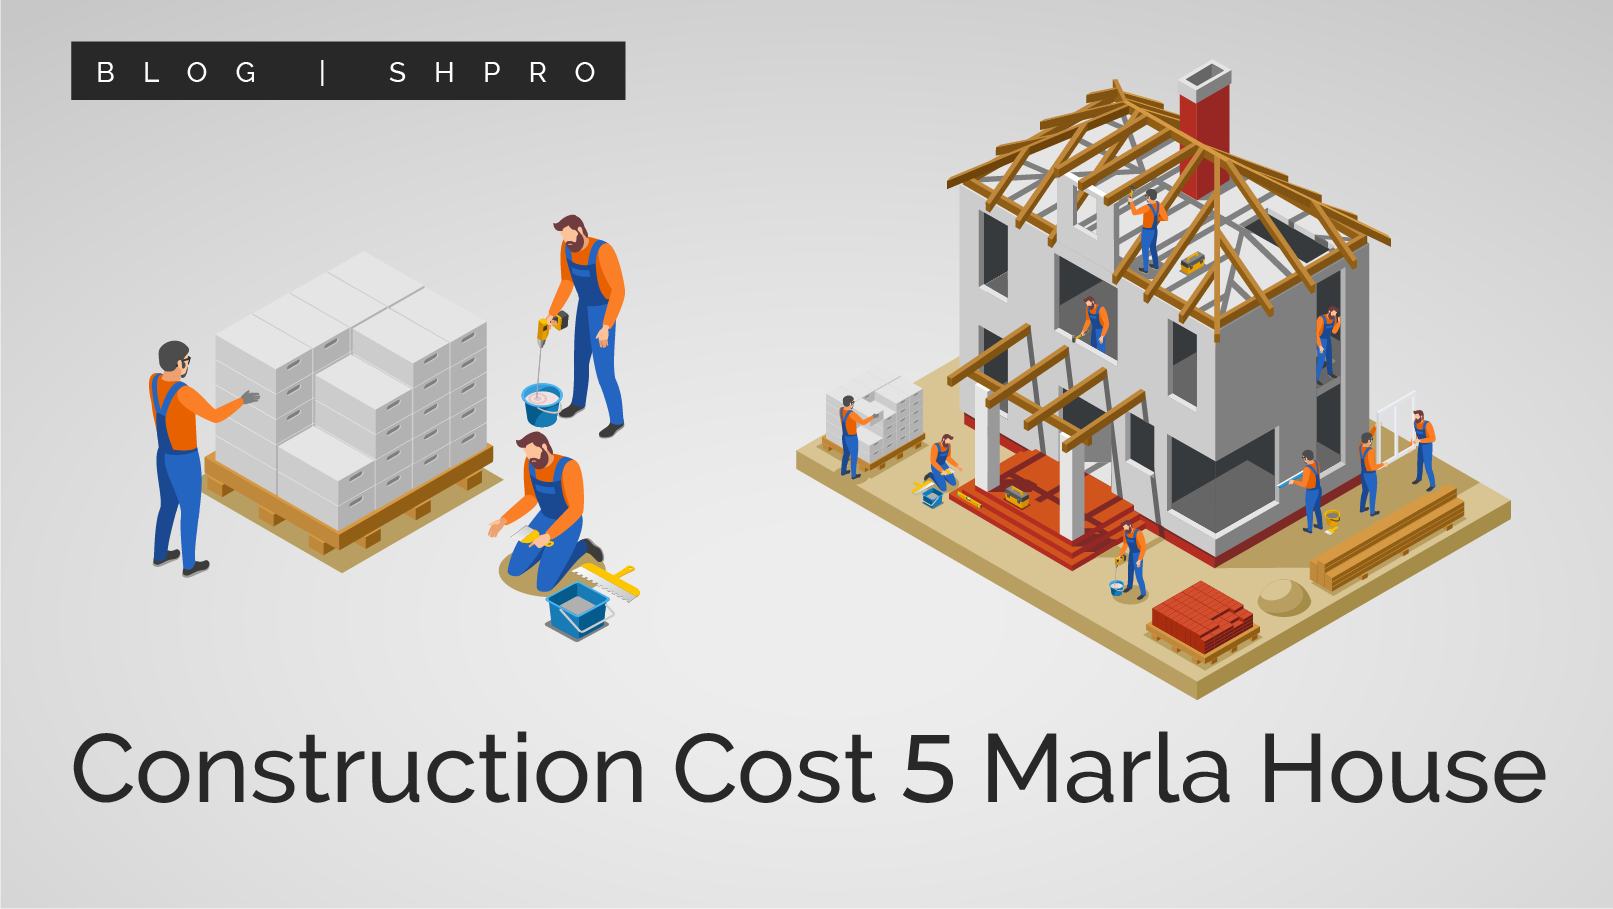 Construction Cost 5 Marla House